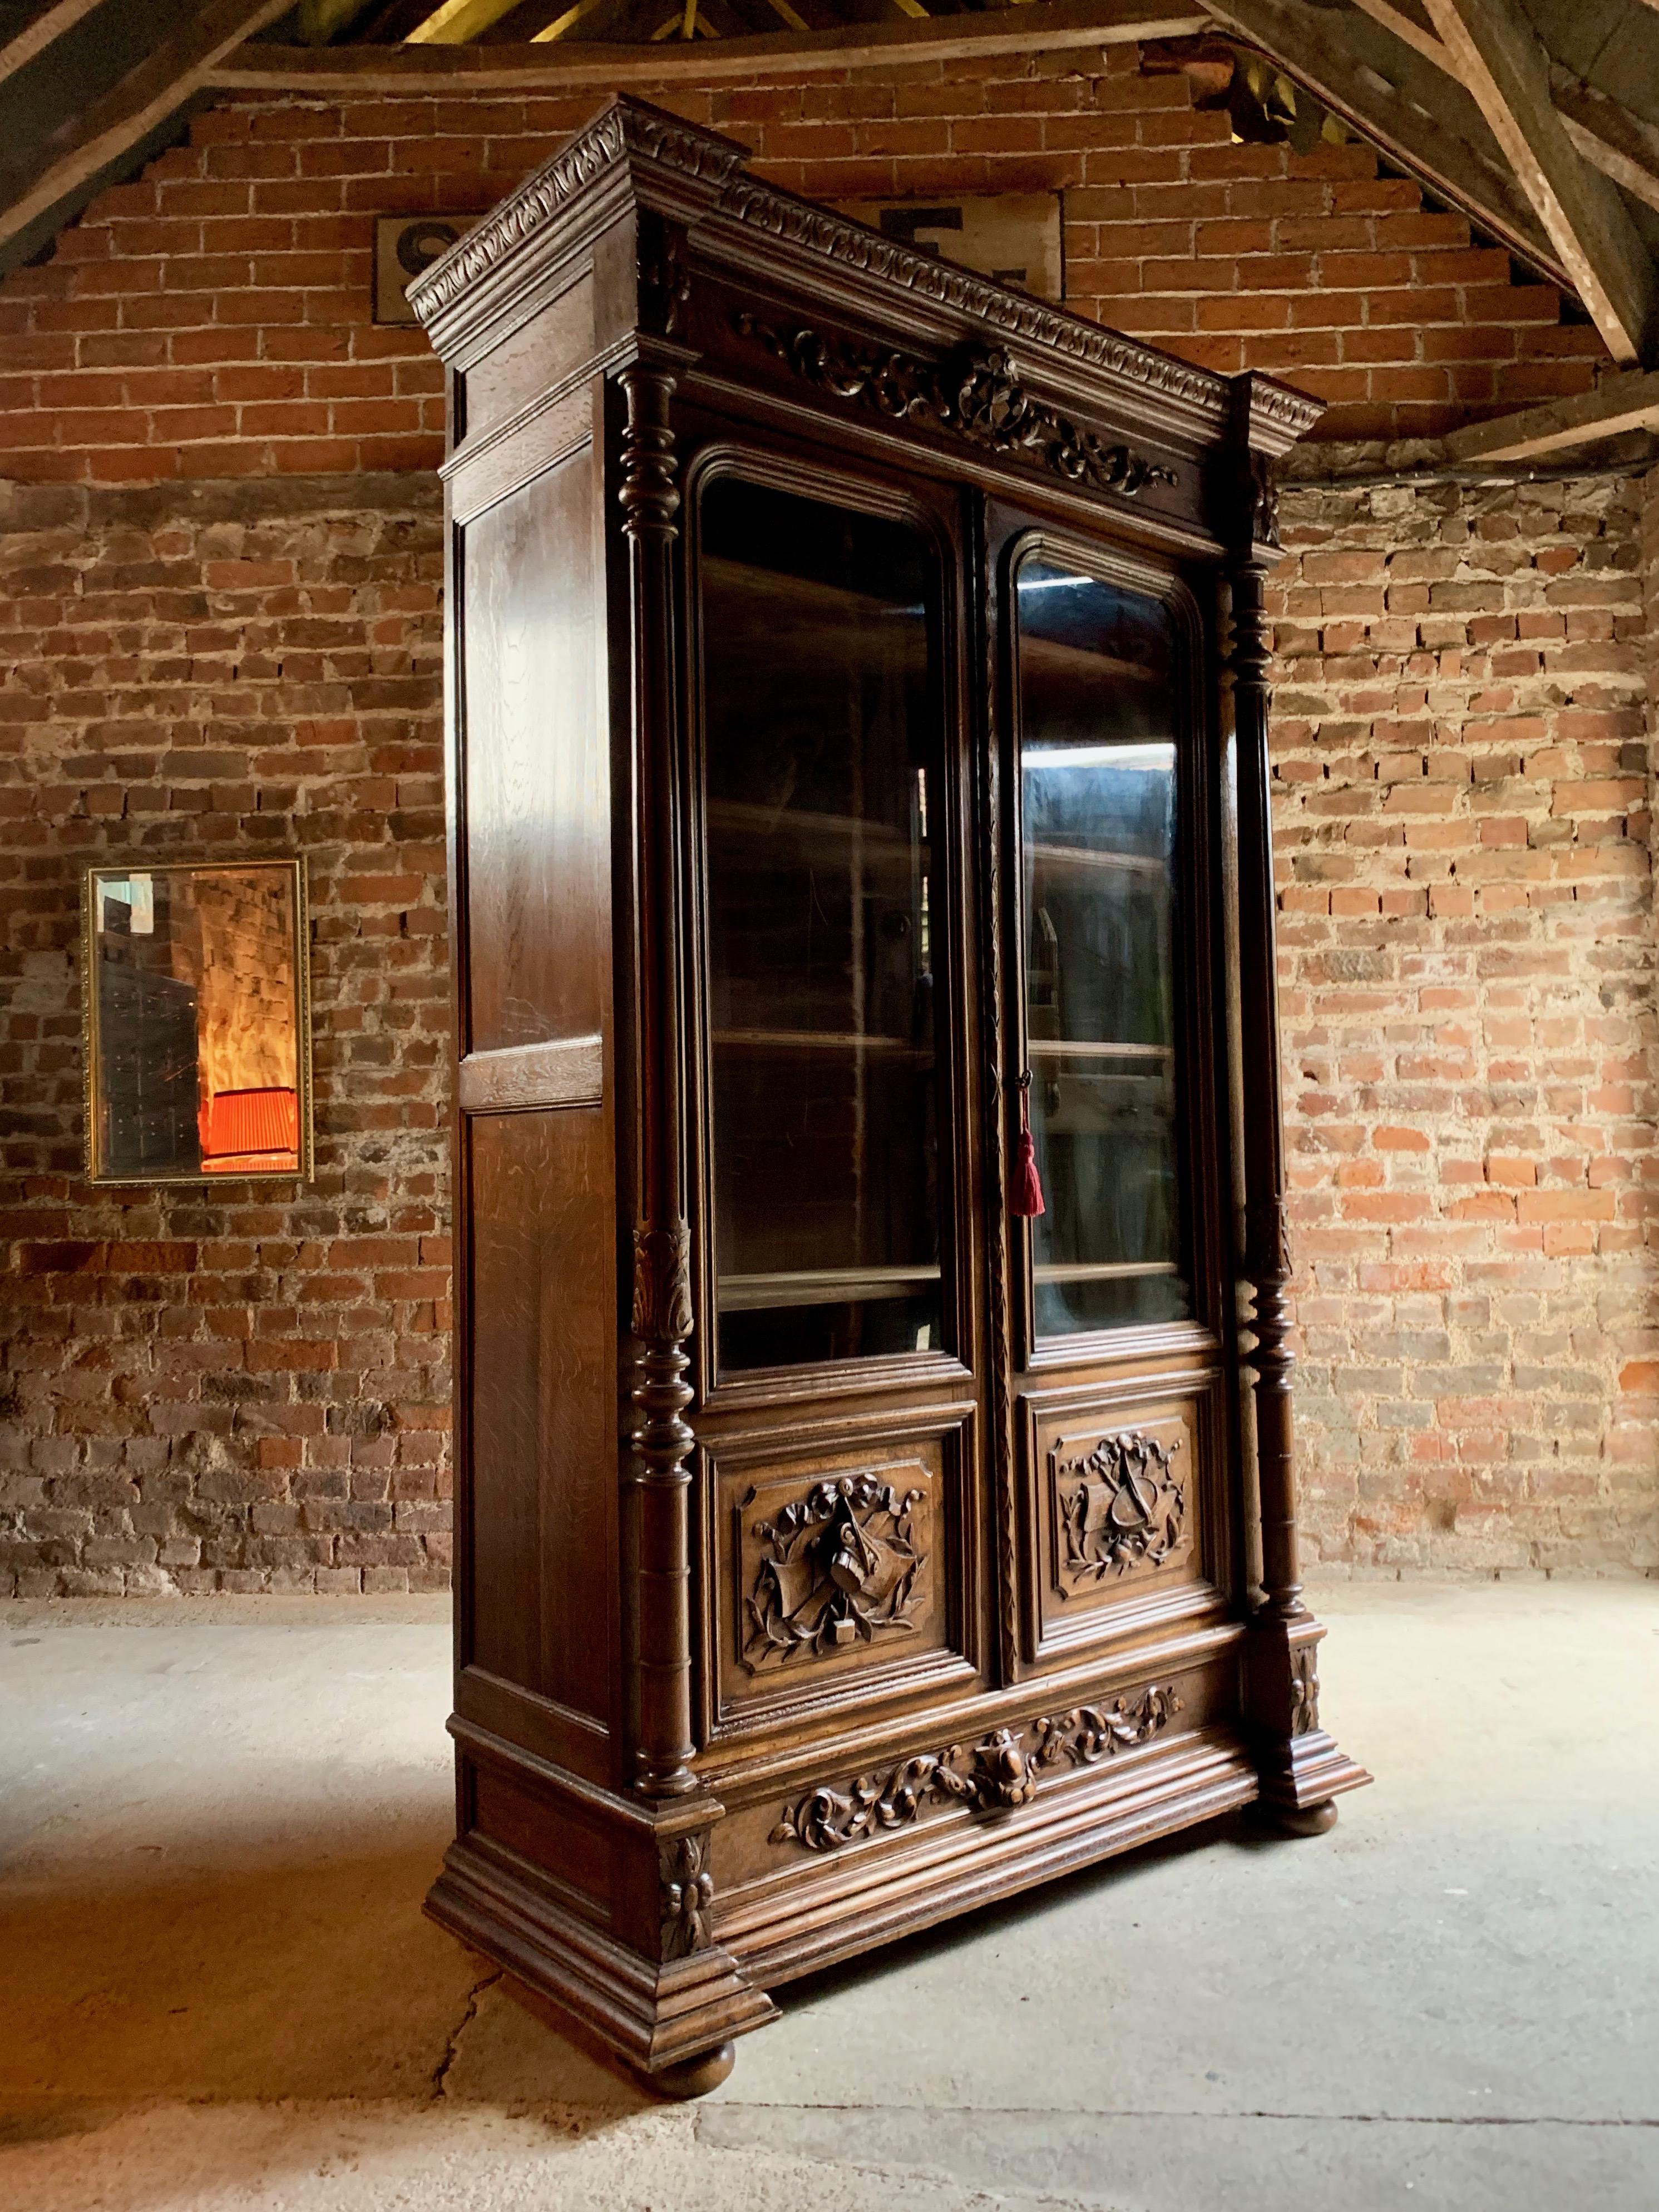 Antique 19th century French solid oak bookcase vitrine, circa 1890

A large 19th century French profusely carved solid oak two-door bookcase vitrine circa 1890, the ornate overhanging molded carved cornice above two heavily carved paneled glazed